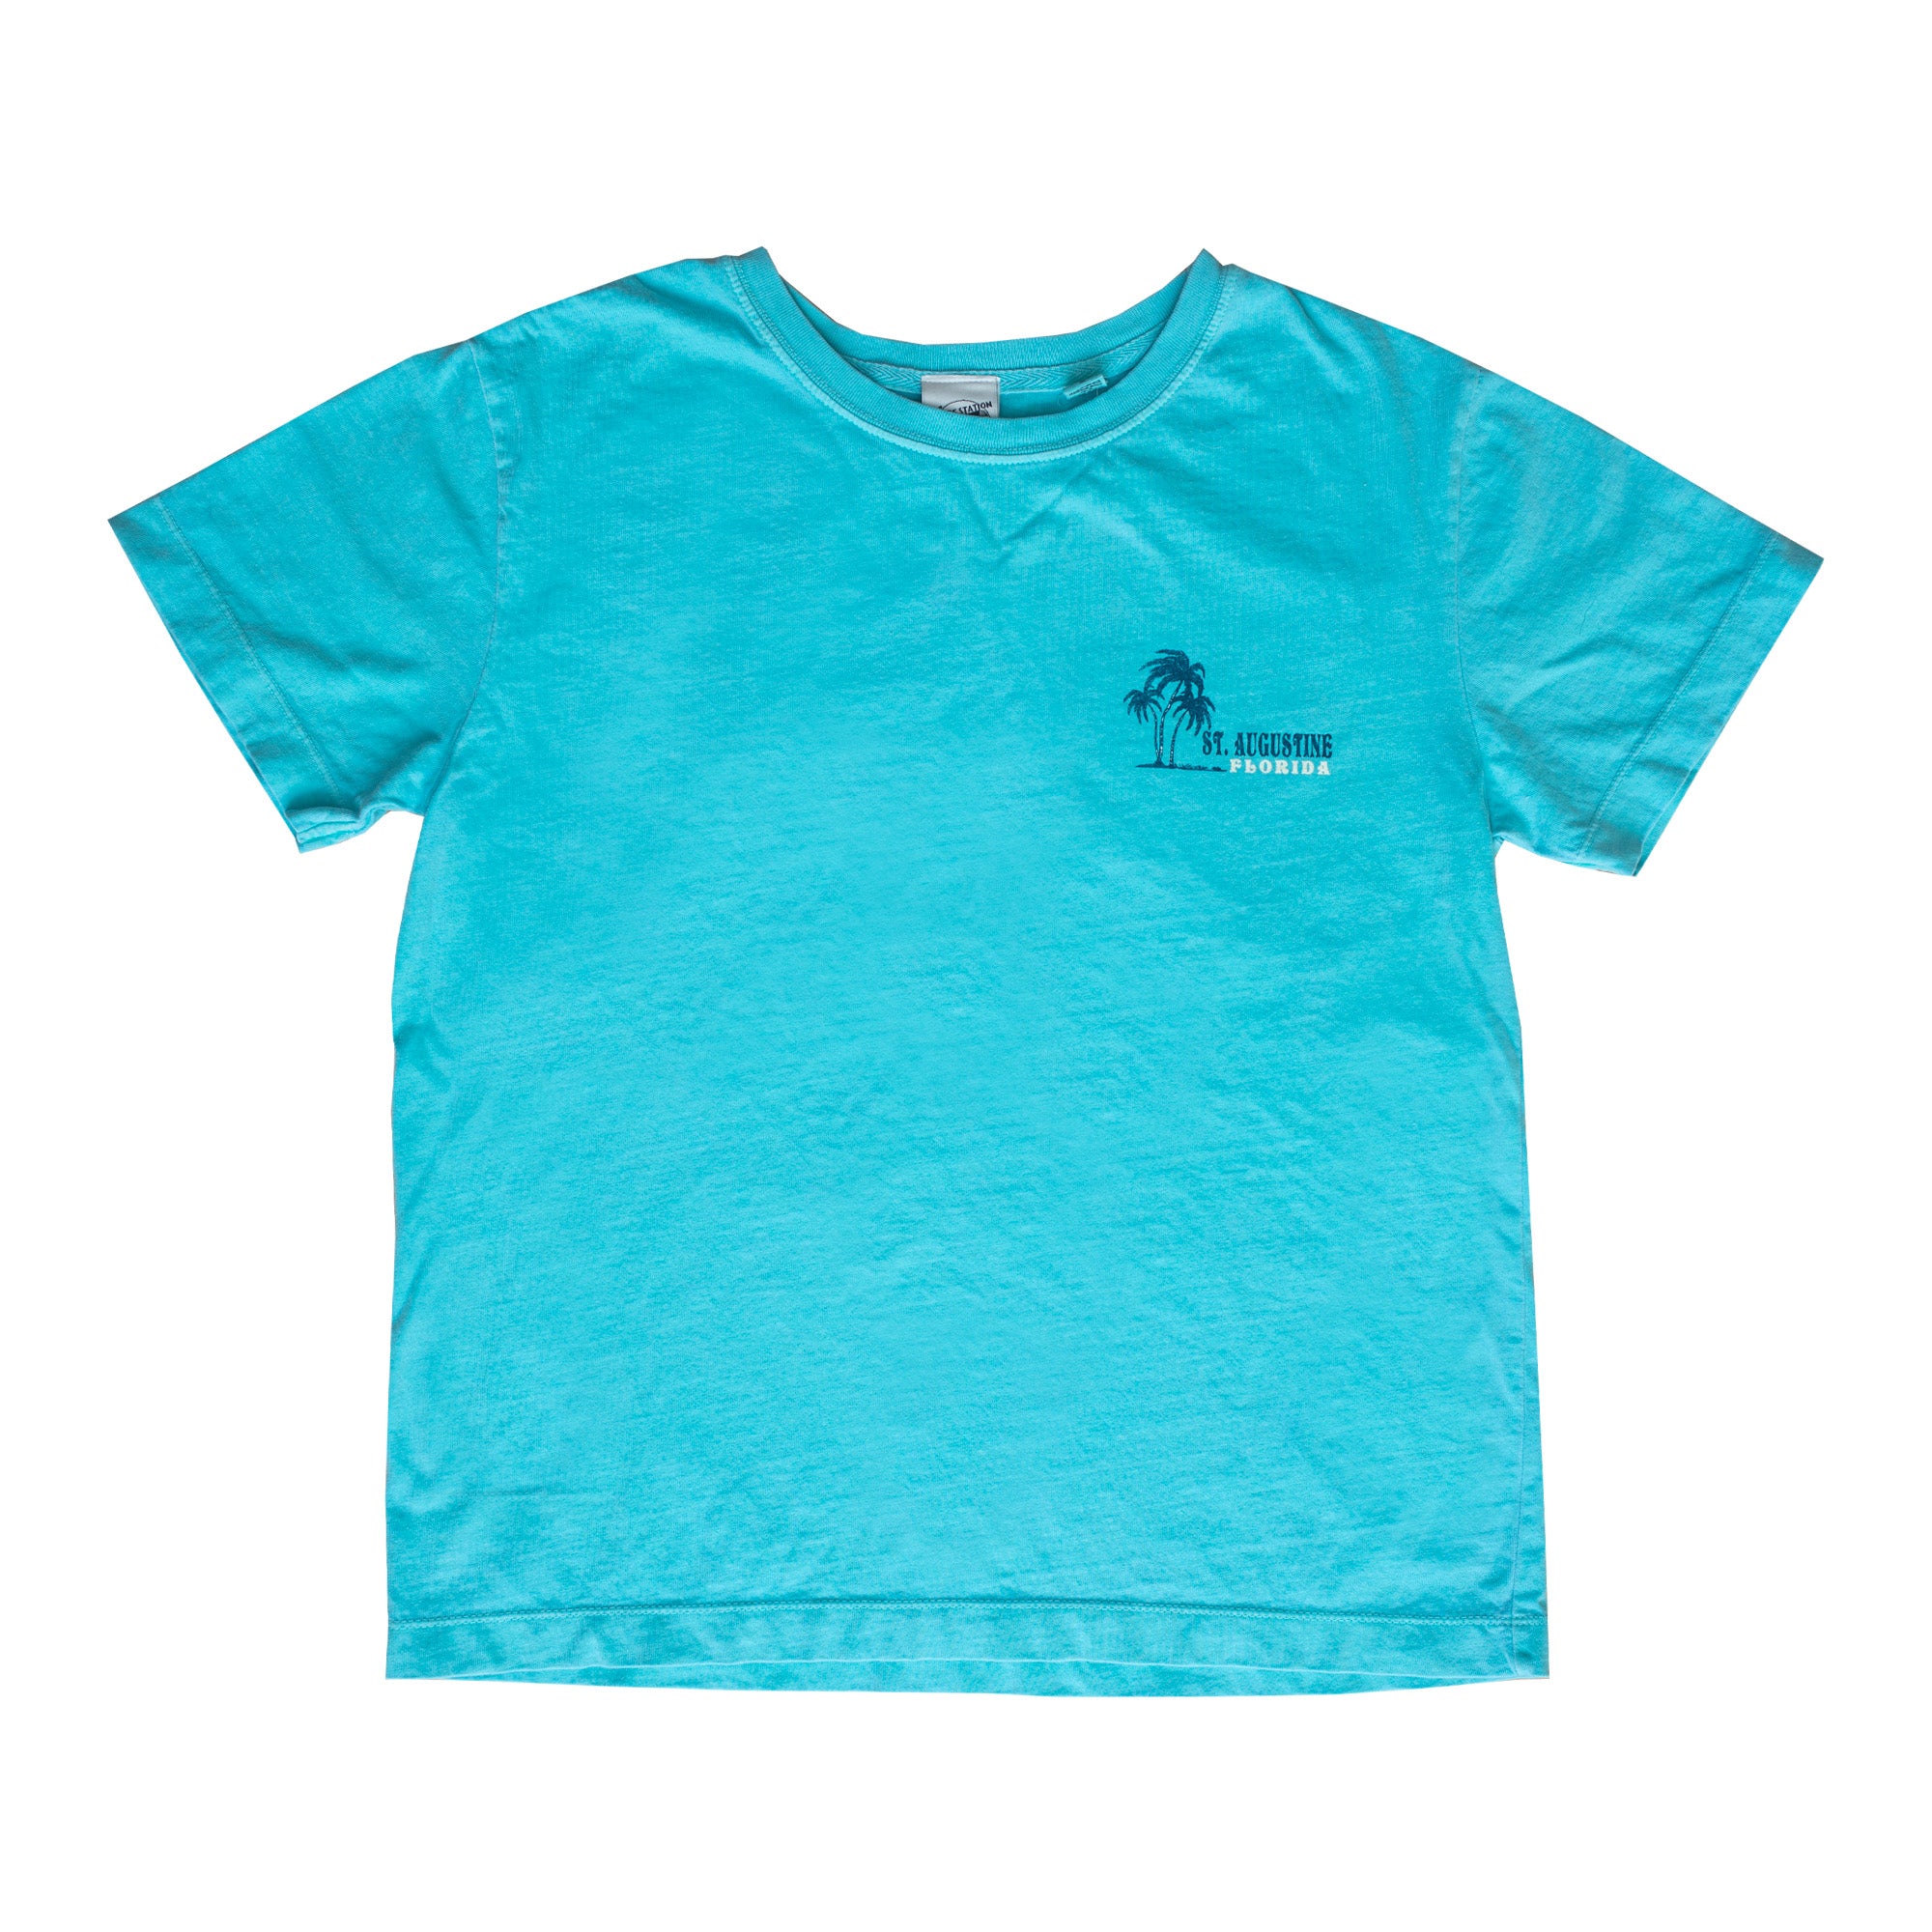 Surf Station Life In Paradise Women's S/S T-Shirt